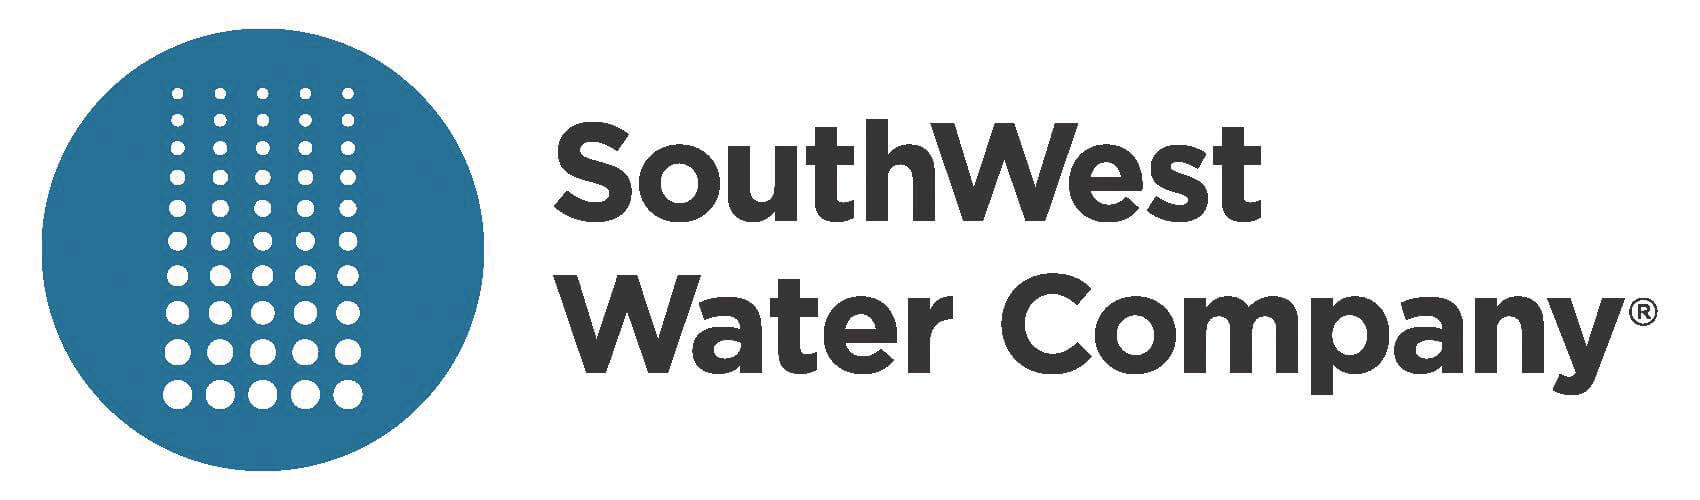 Southwest Water Company